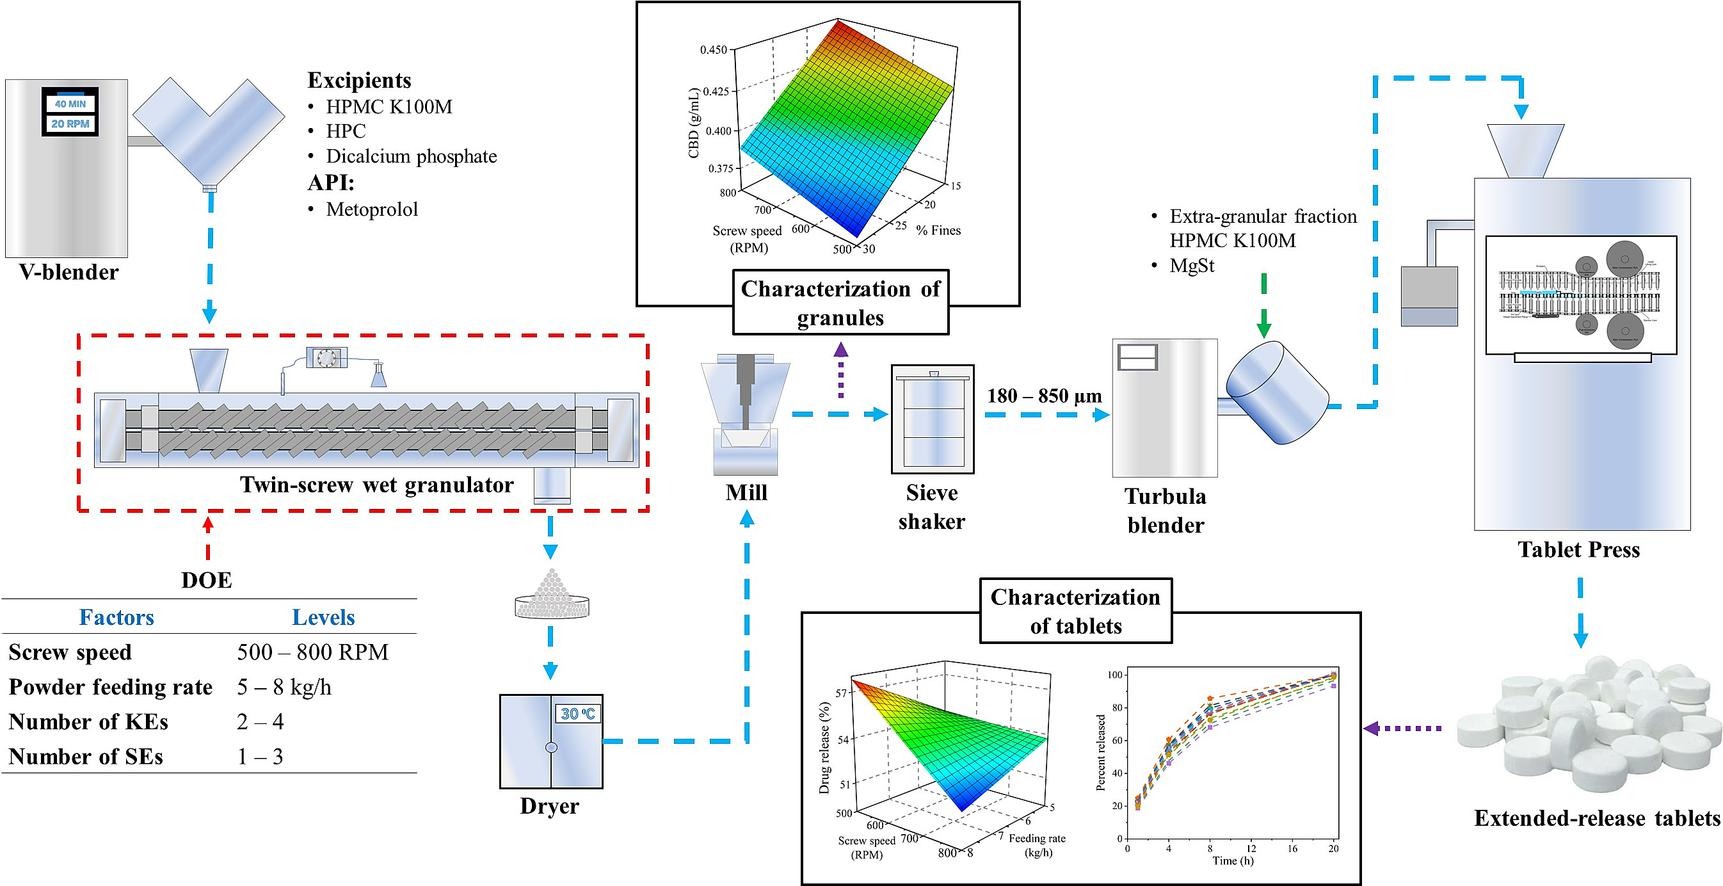 Characterizing a design space for a twin-screw wet granulation process